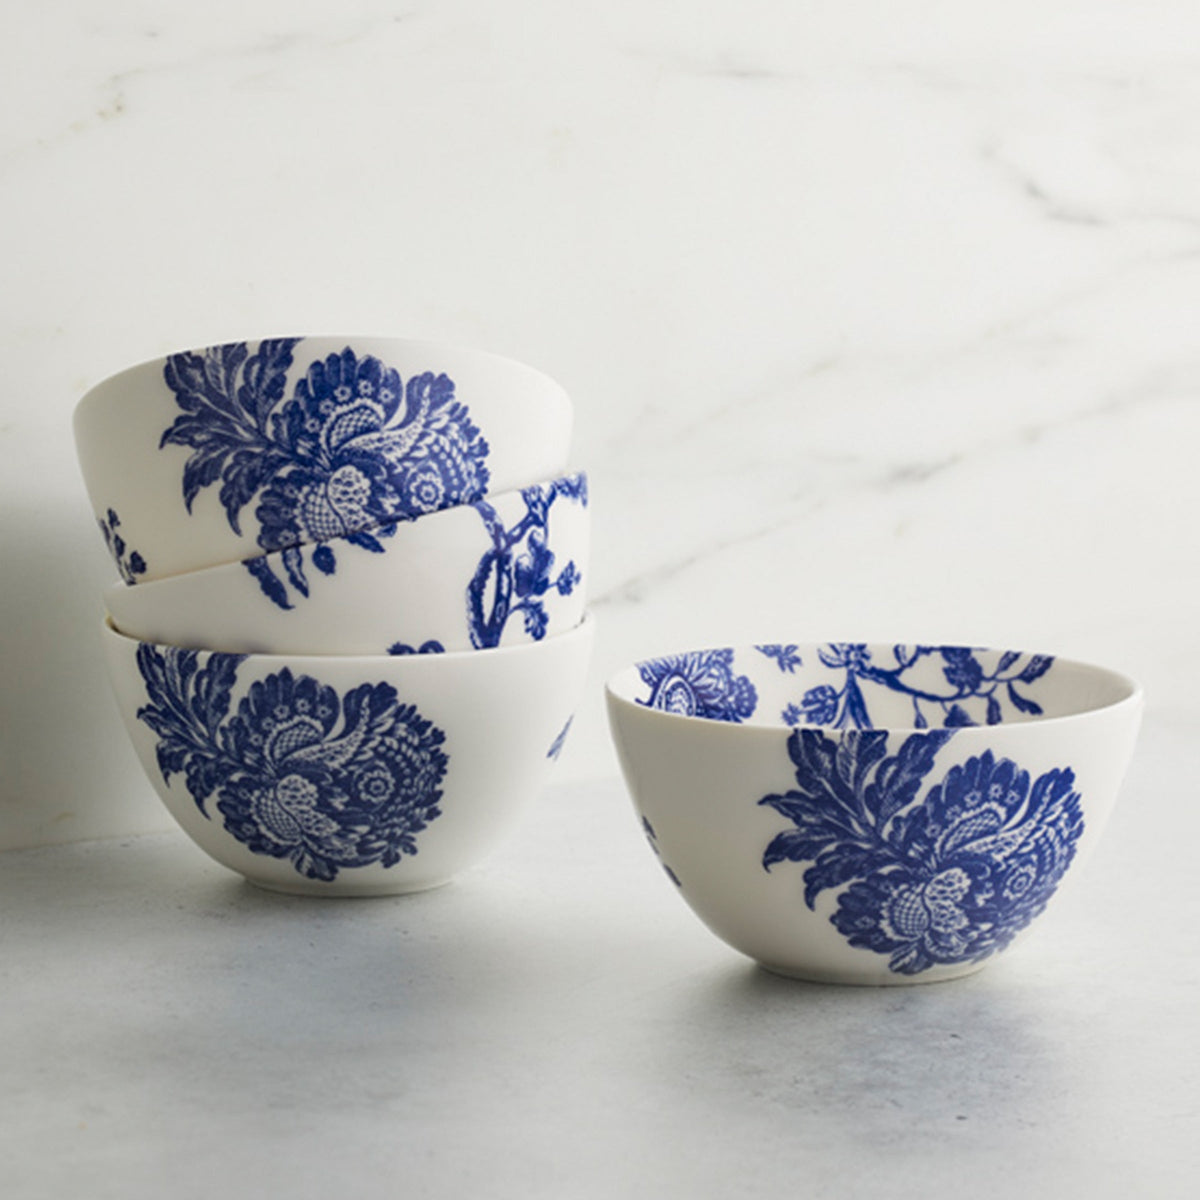 Set of 4 Blue and White Porcelain Arcadia Cereal Bowls from Caskata